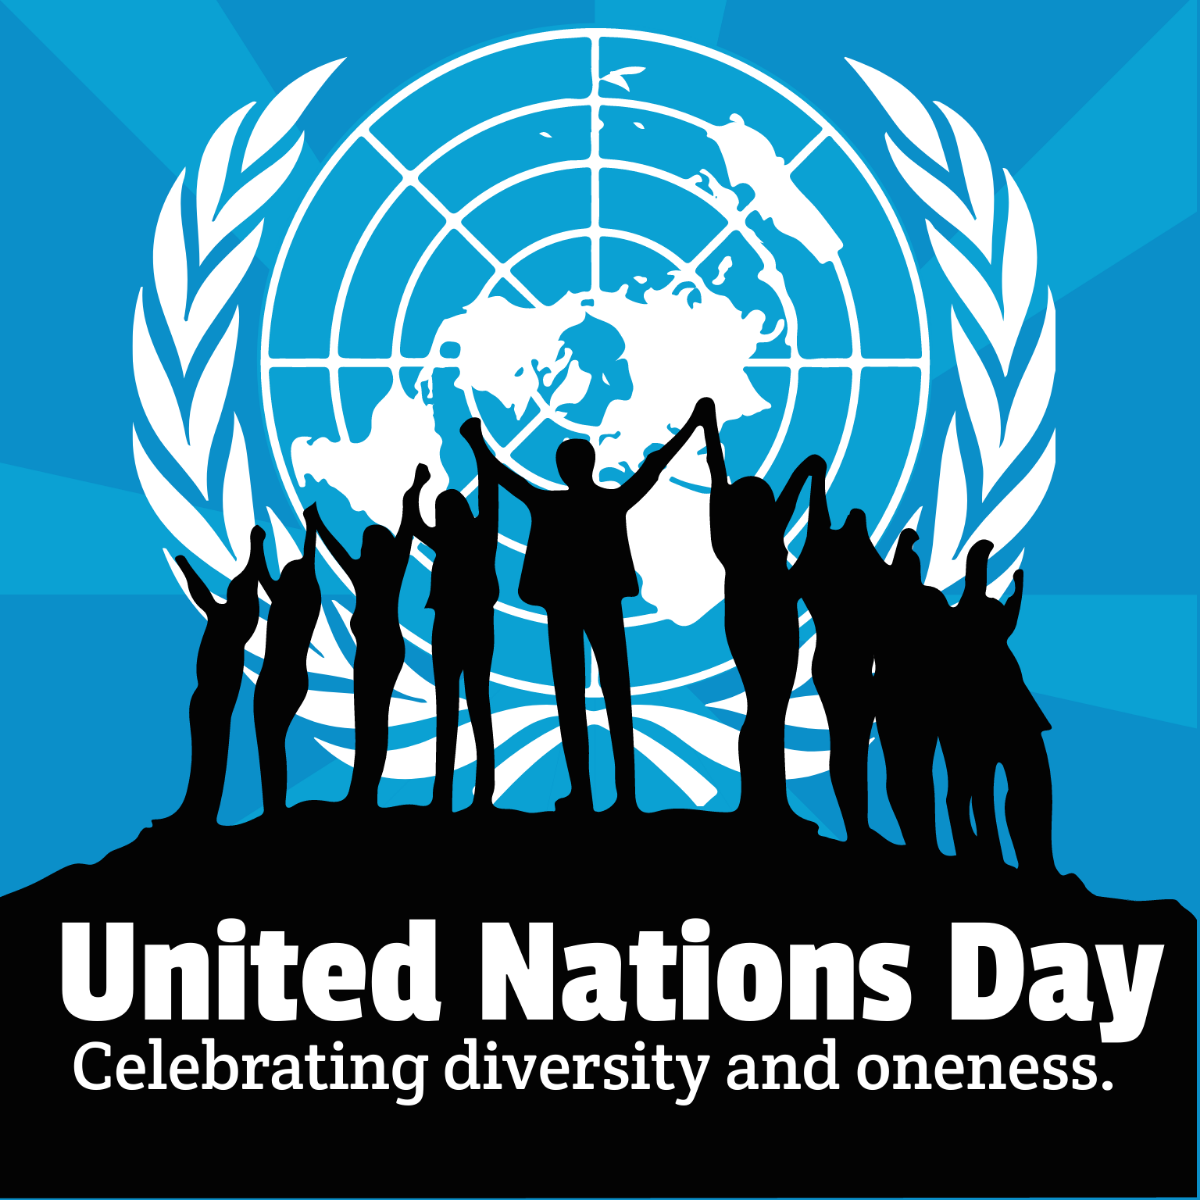 Free United Nations Day Flyer Vector Template